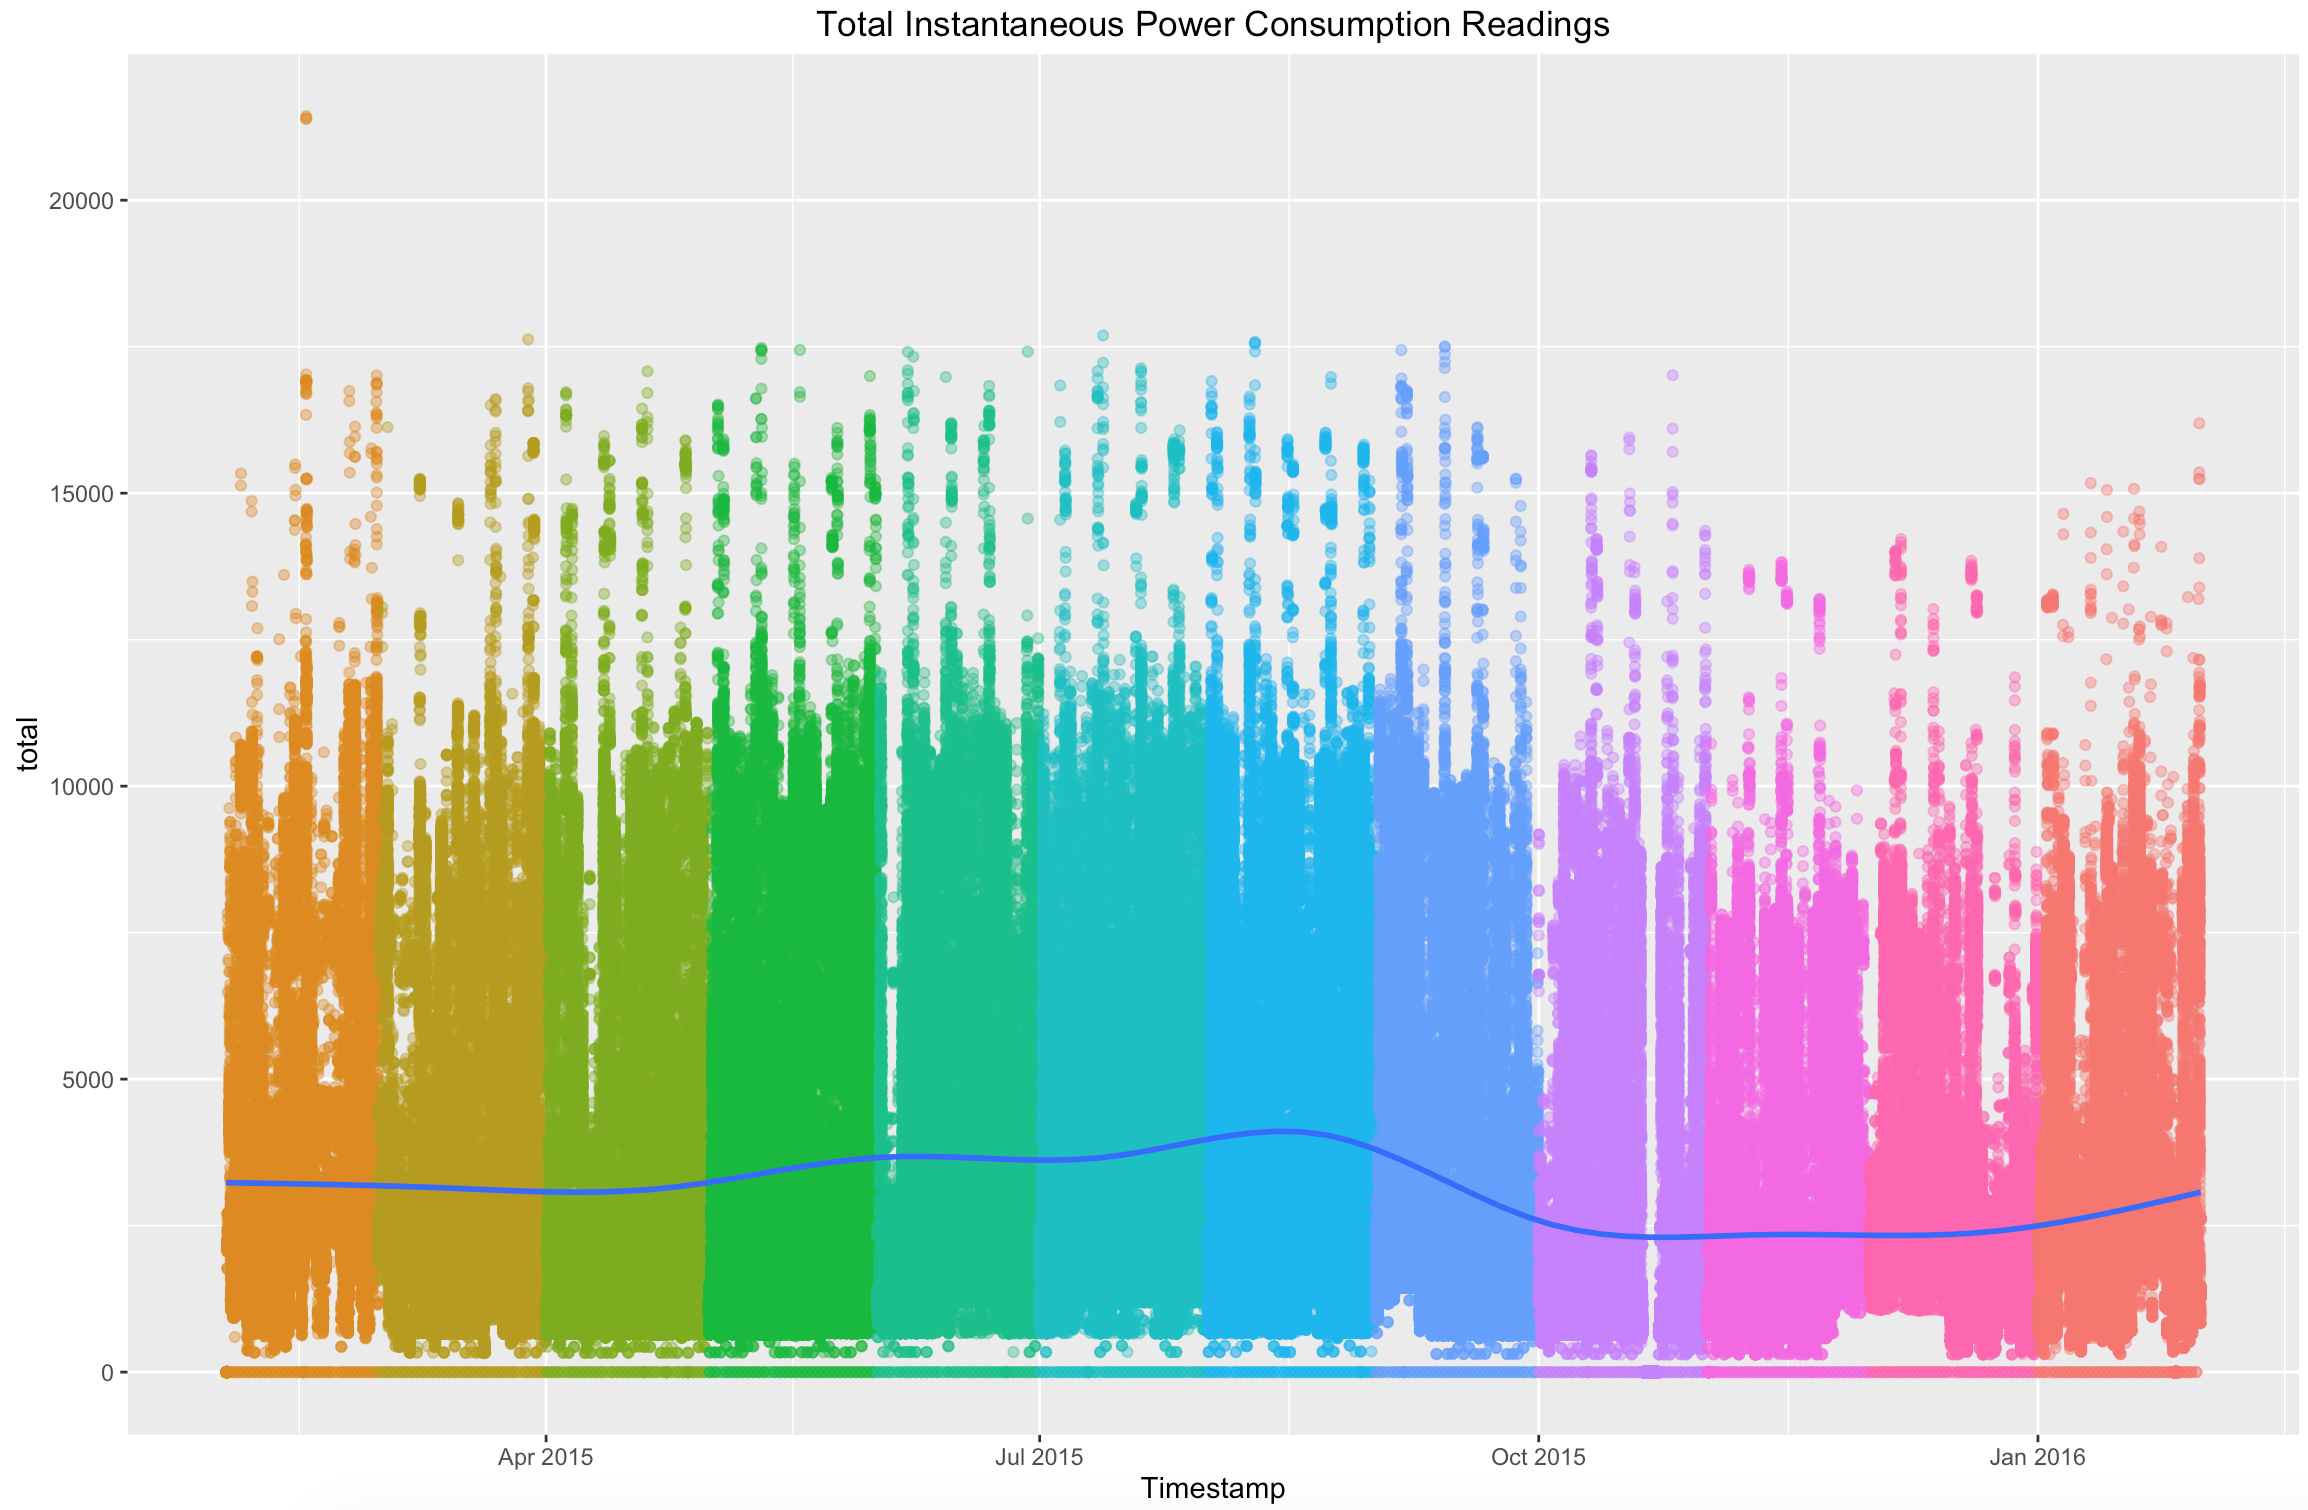 Total Instantaneous Power Consumption Readings visualization